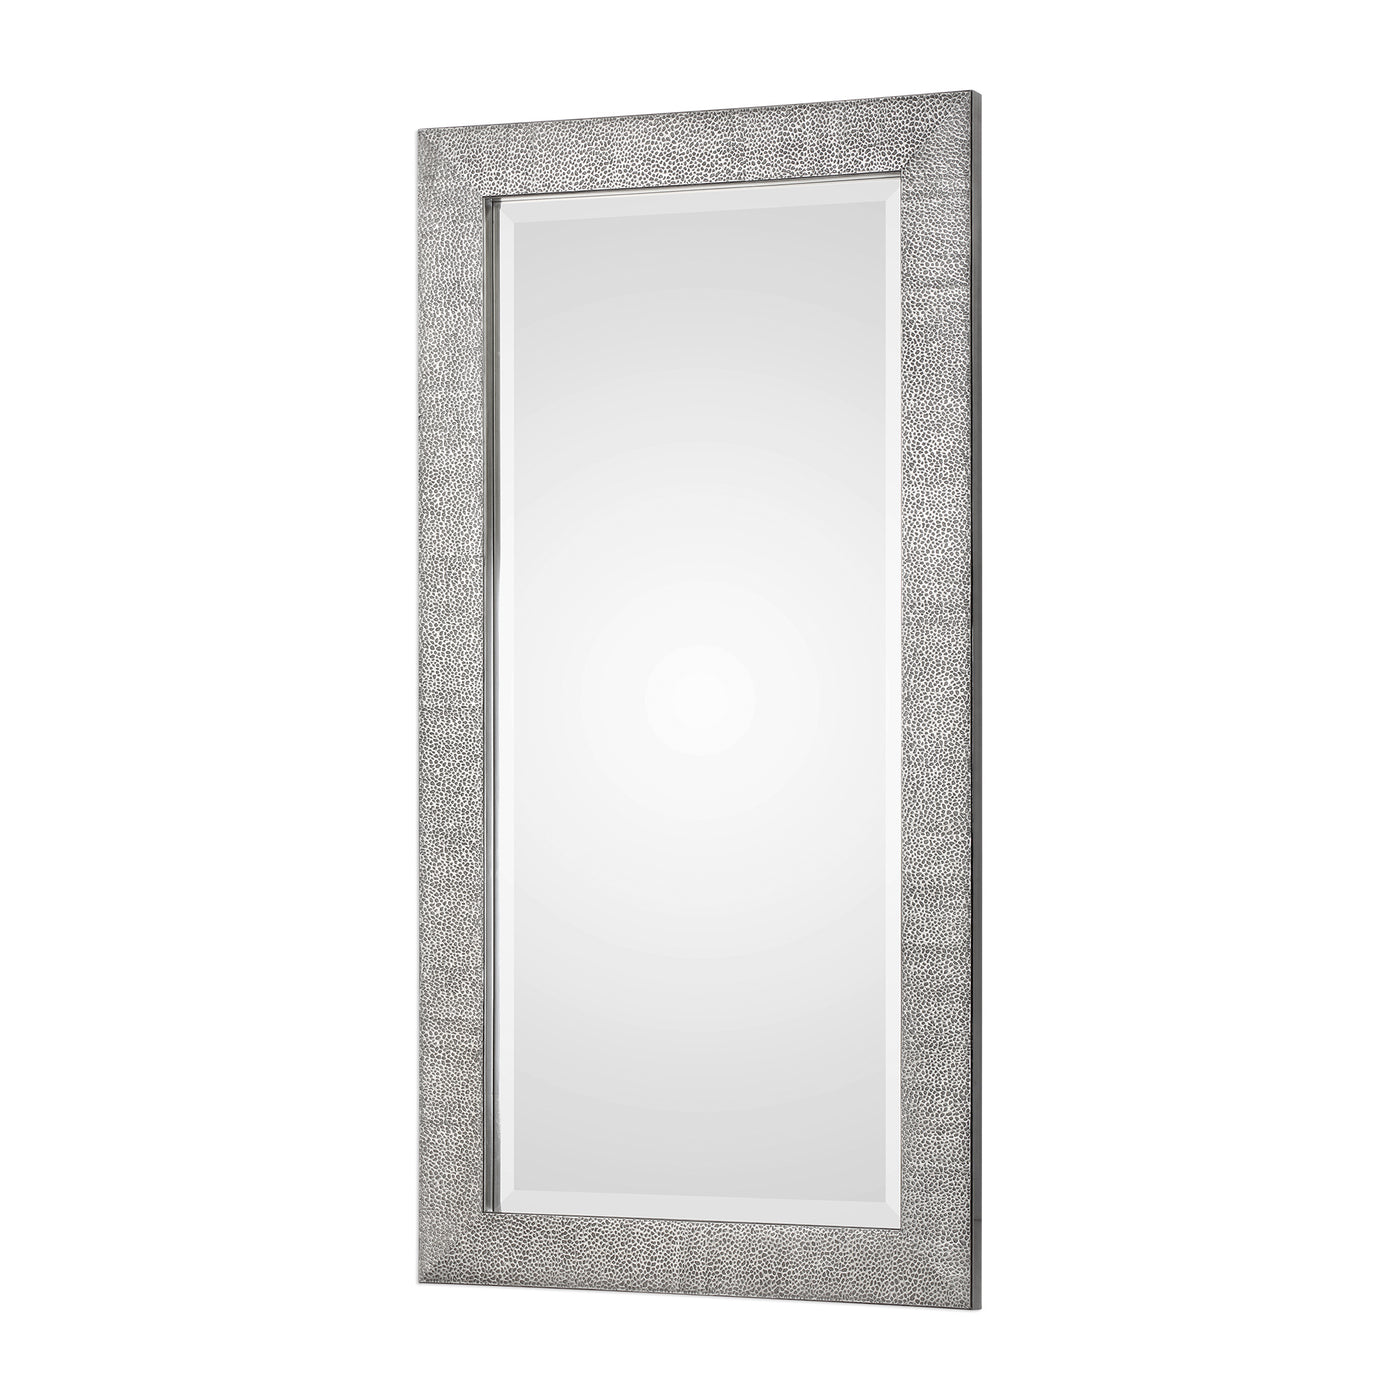 This Contemporary Design Features A Textured Solid Wood Frame Finished In A Metallic Silver With A Light Gray Wash. Mirror...